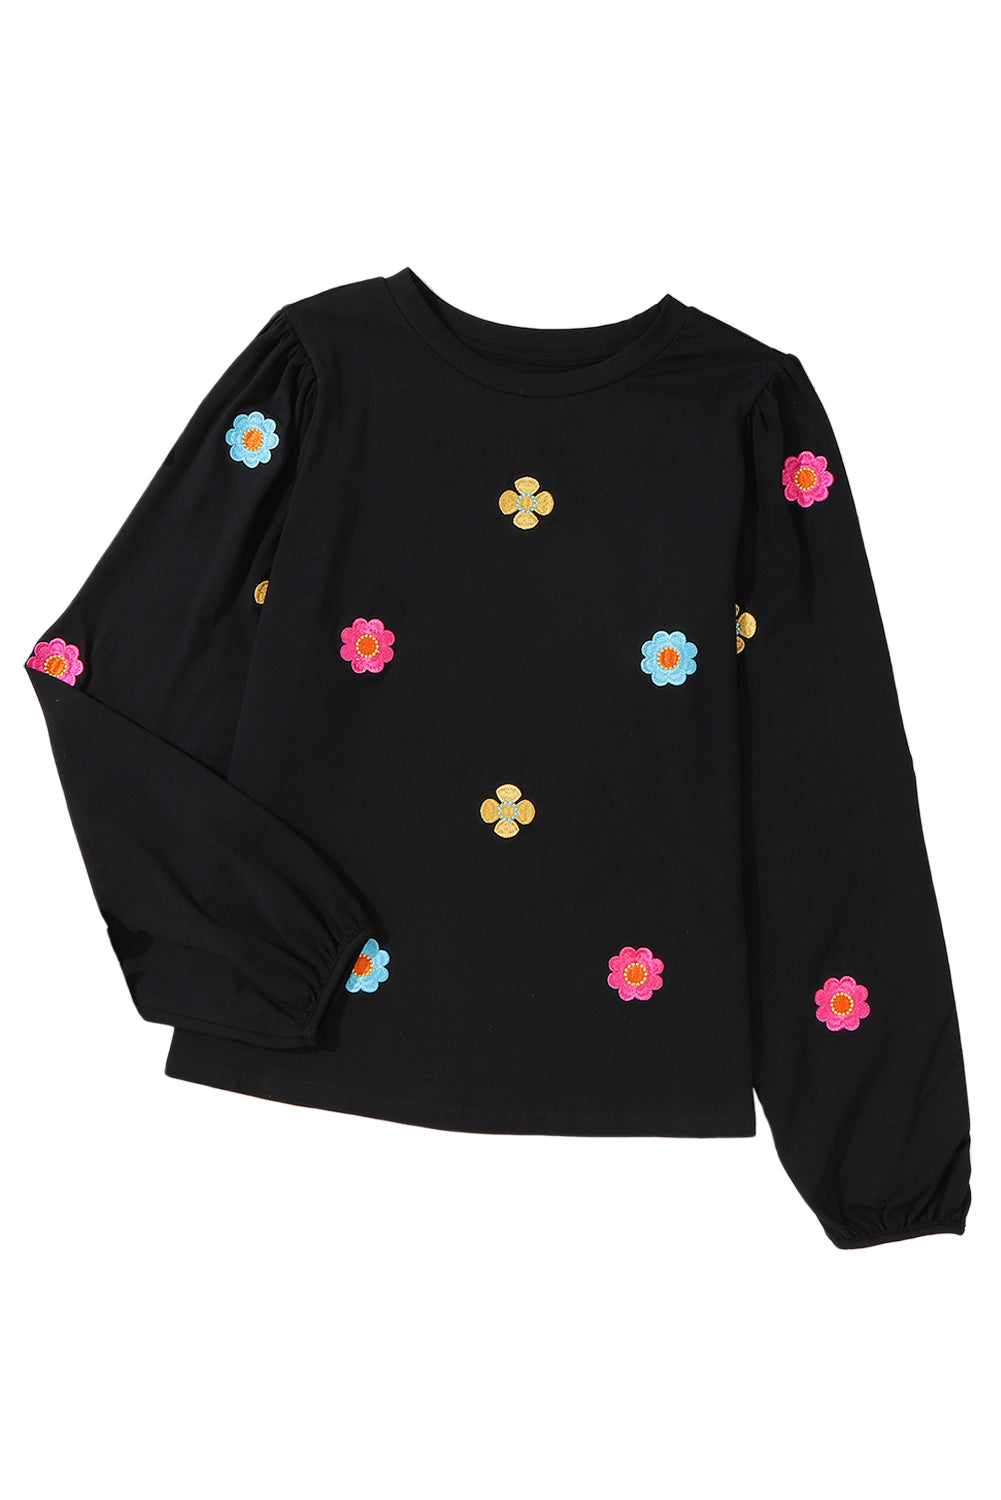 Medium Grey Floral Embroidered Puff Sleeve Blouse